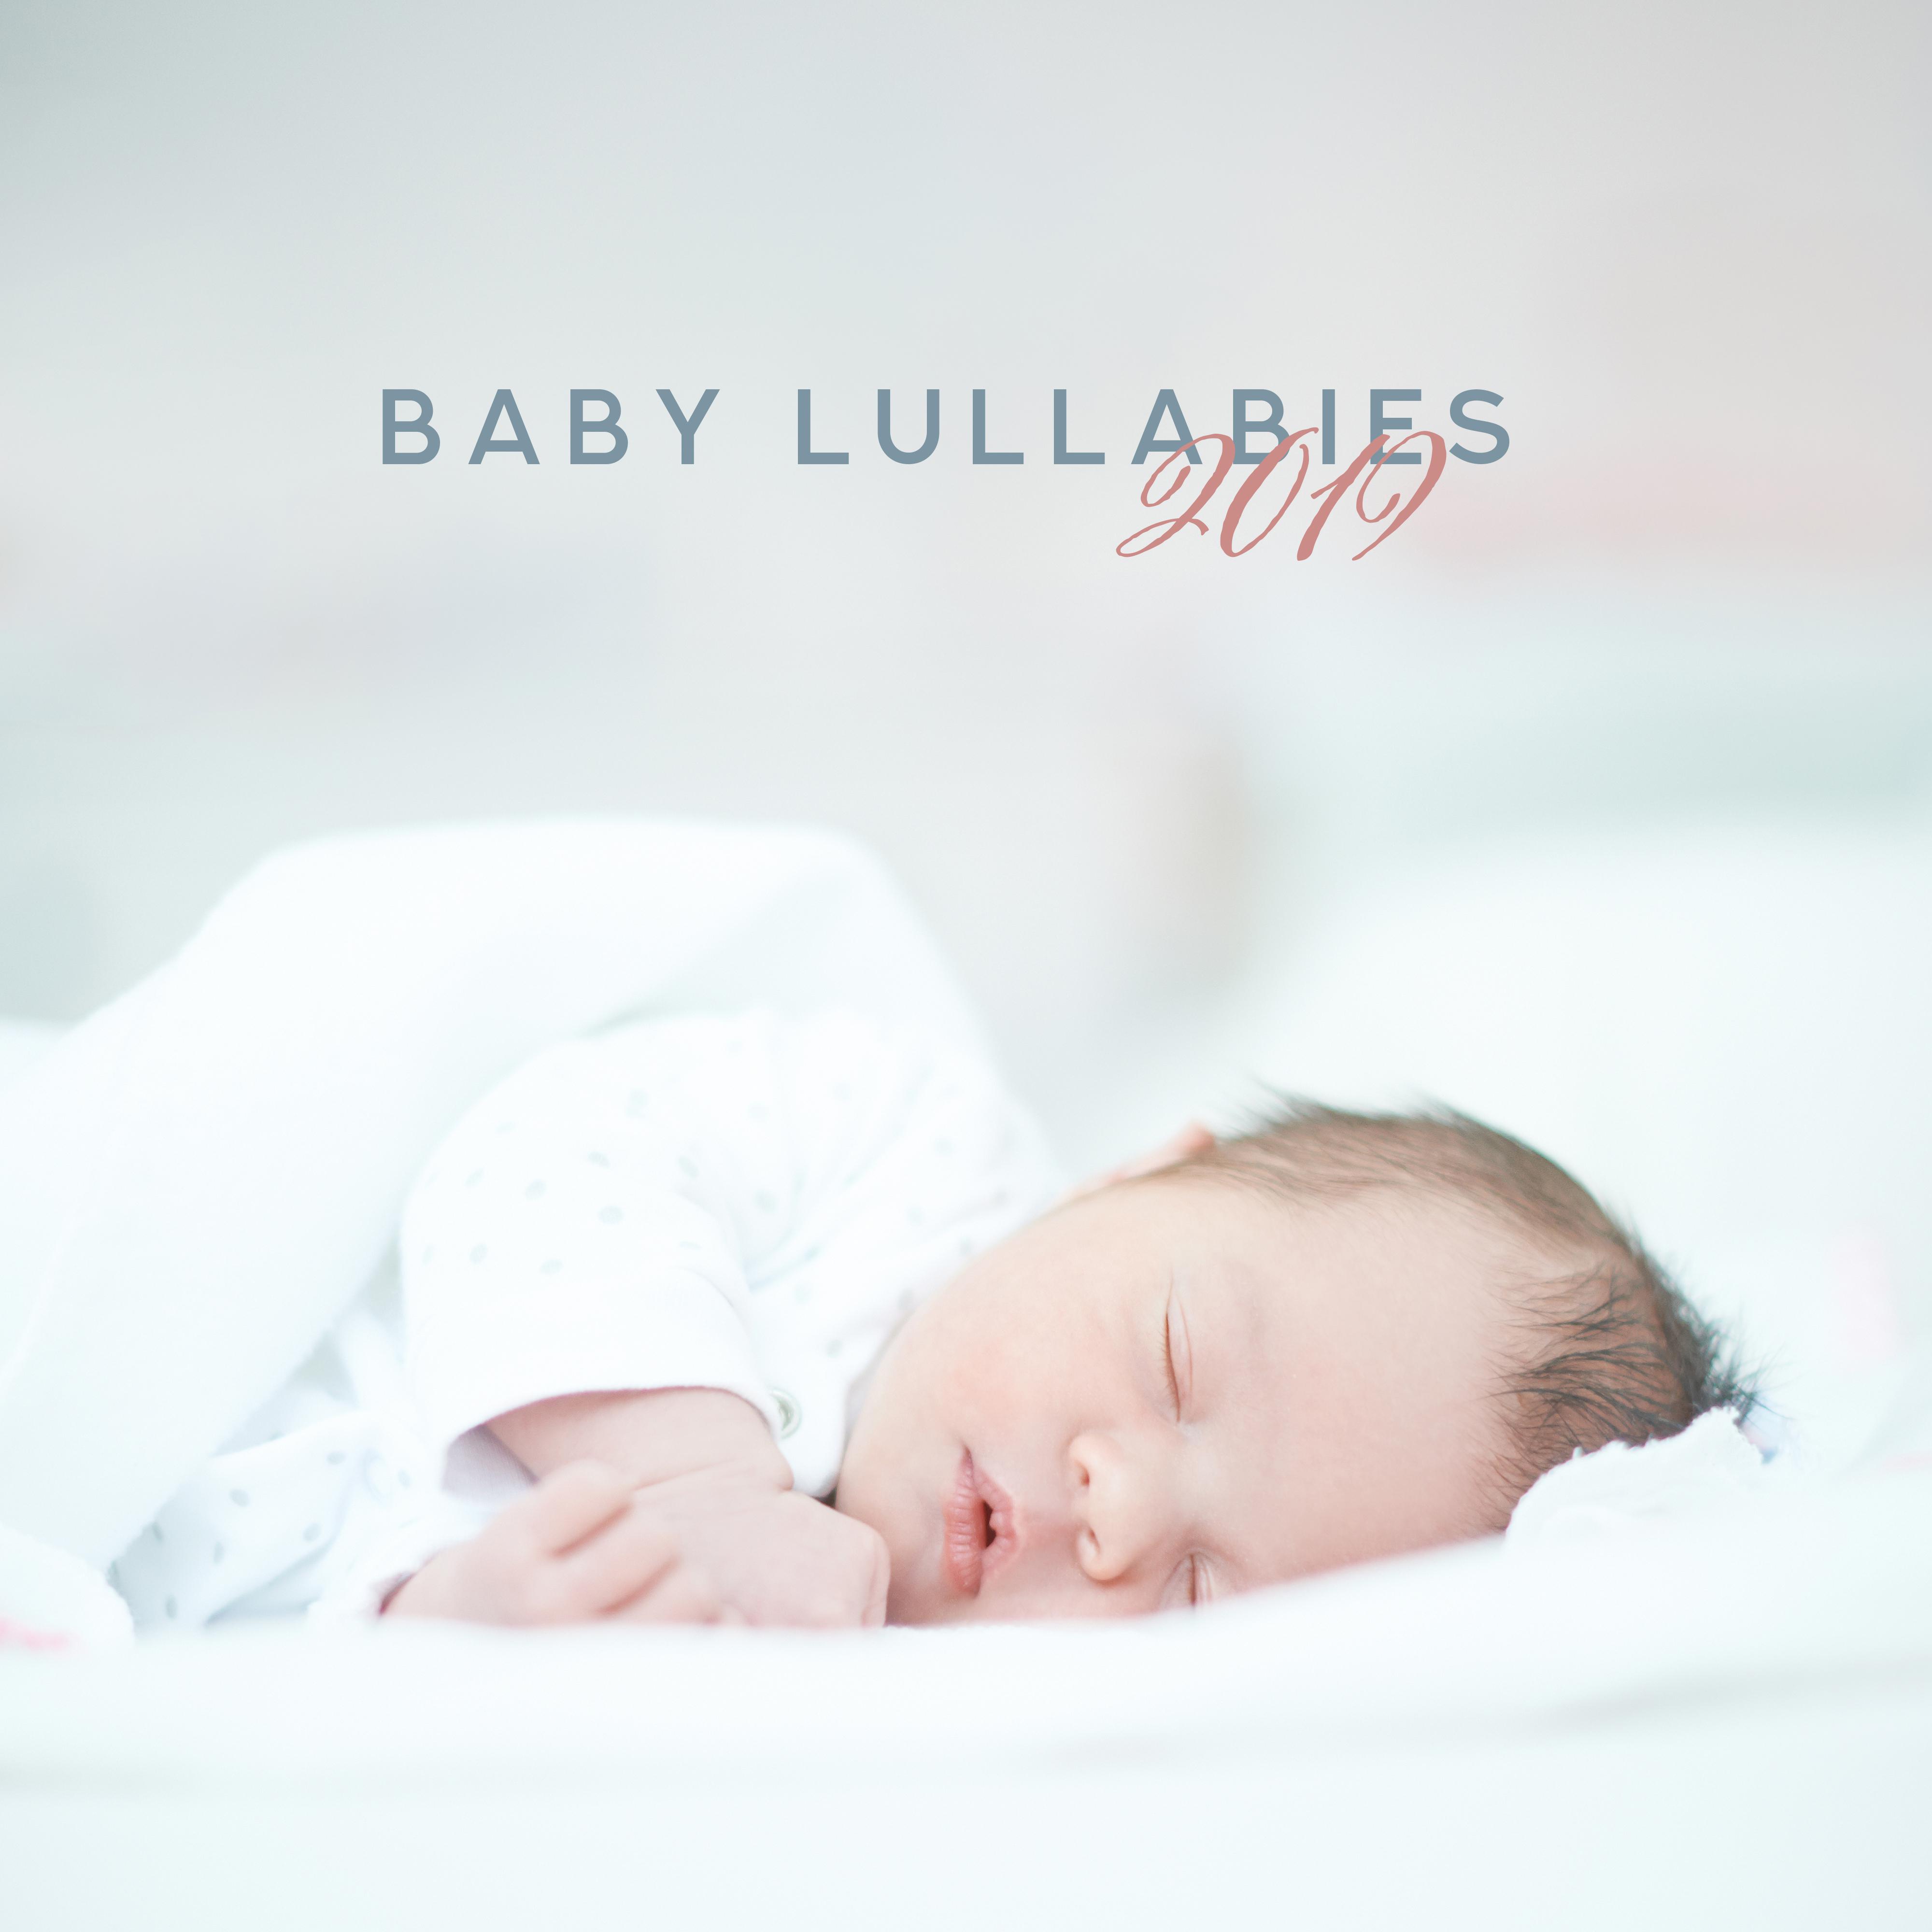 Baby Lullabies 2019  Soothing Sounds for Sleep, Baby Melodies at Night, Toddler Music, Music Therapy, Lounge, Night Music for Kids